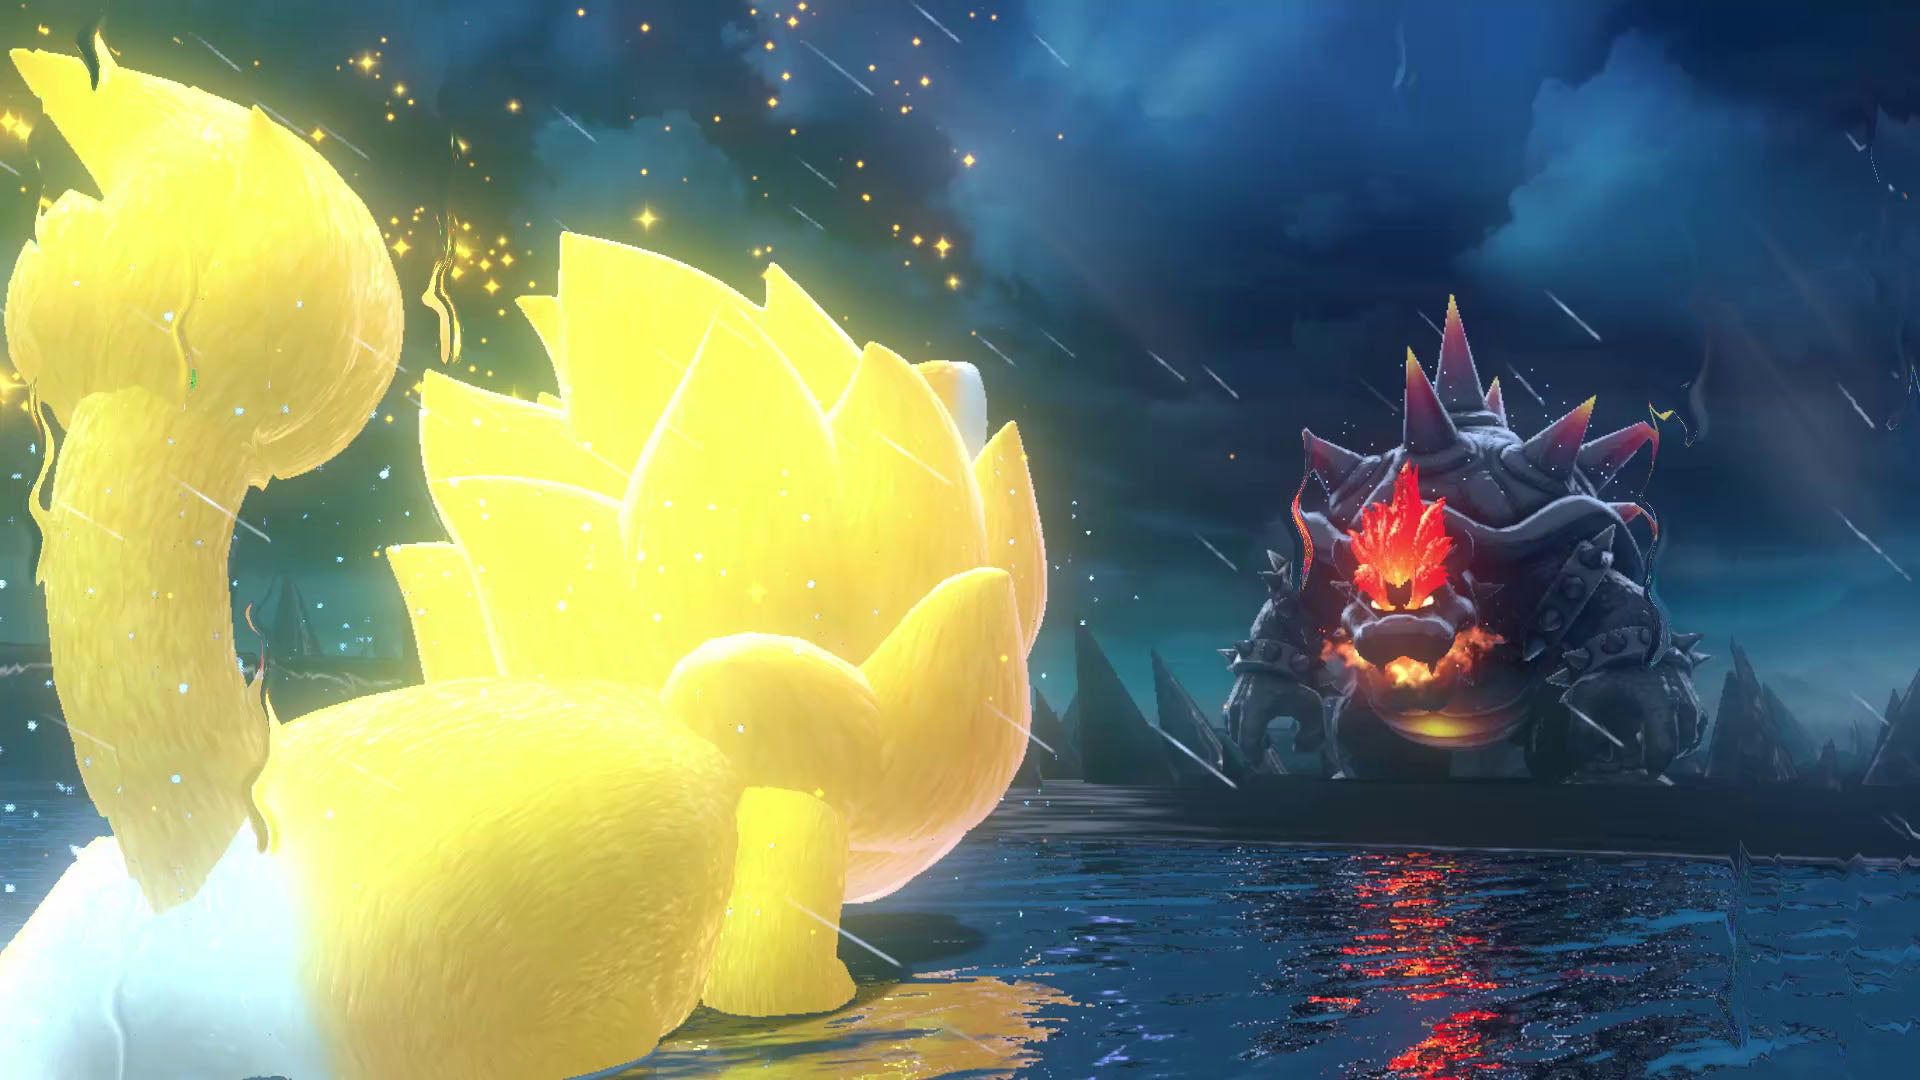 Super Mario 3D World + Bowser's Fury: The Final Preview